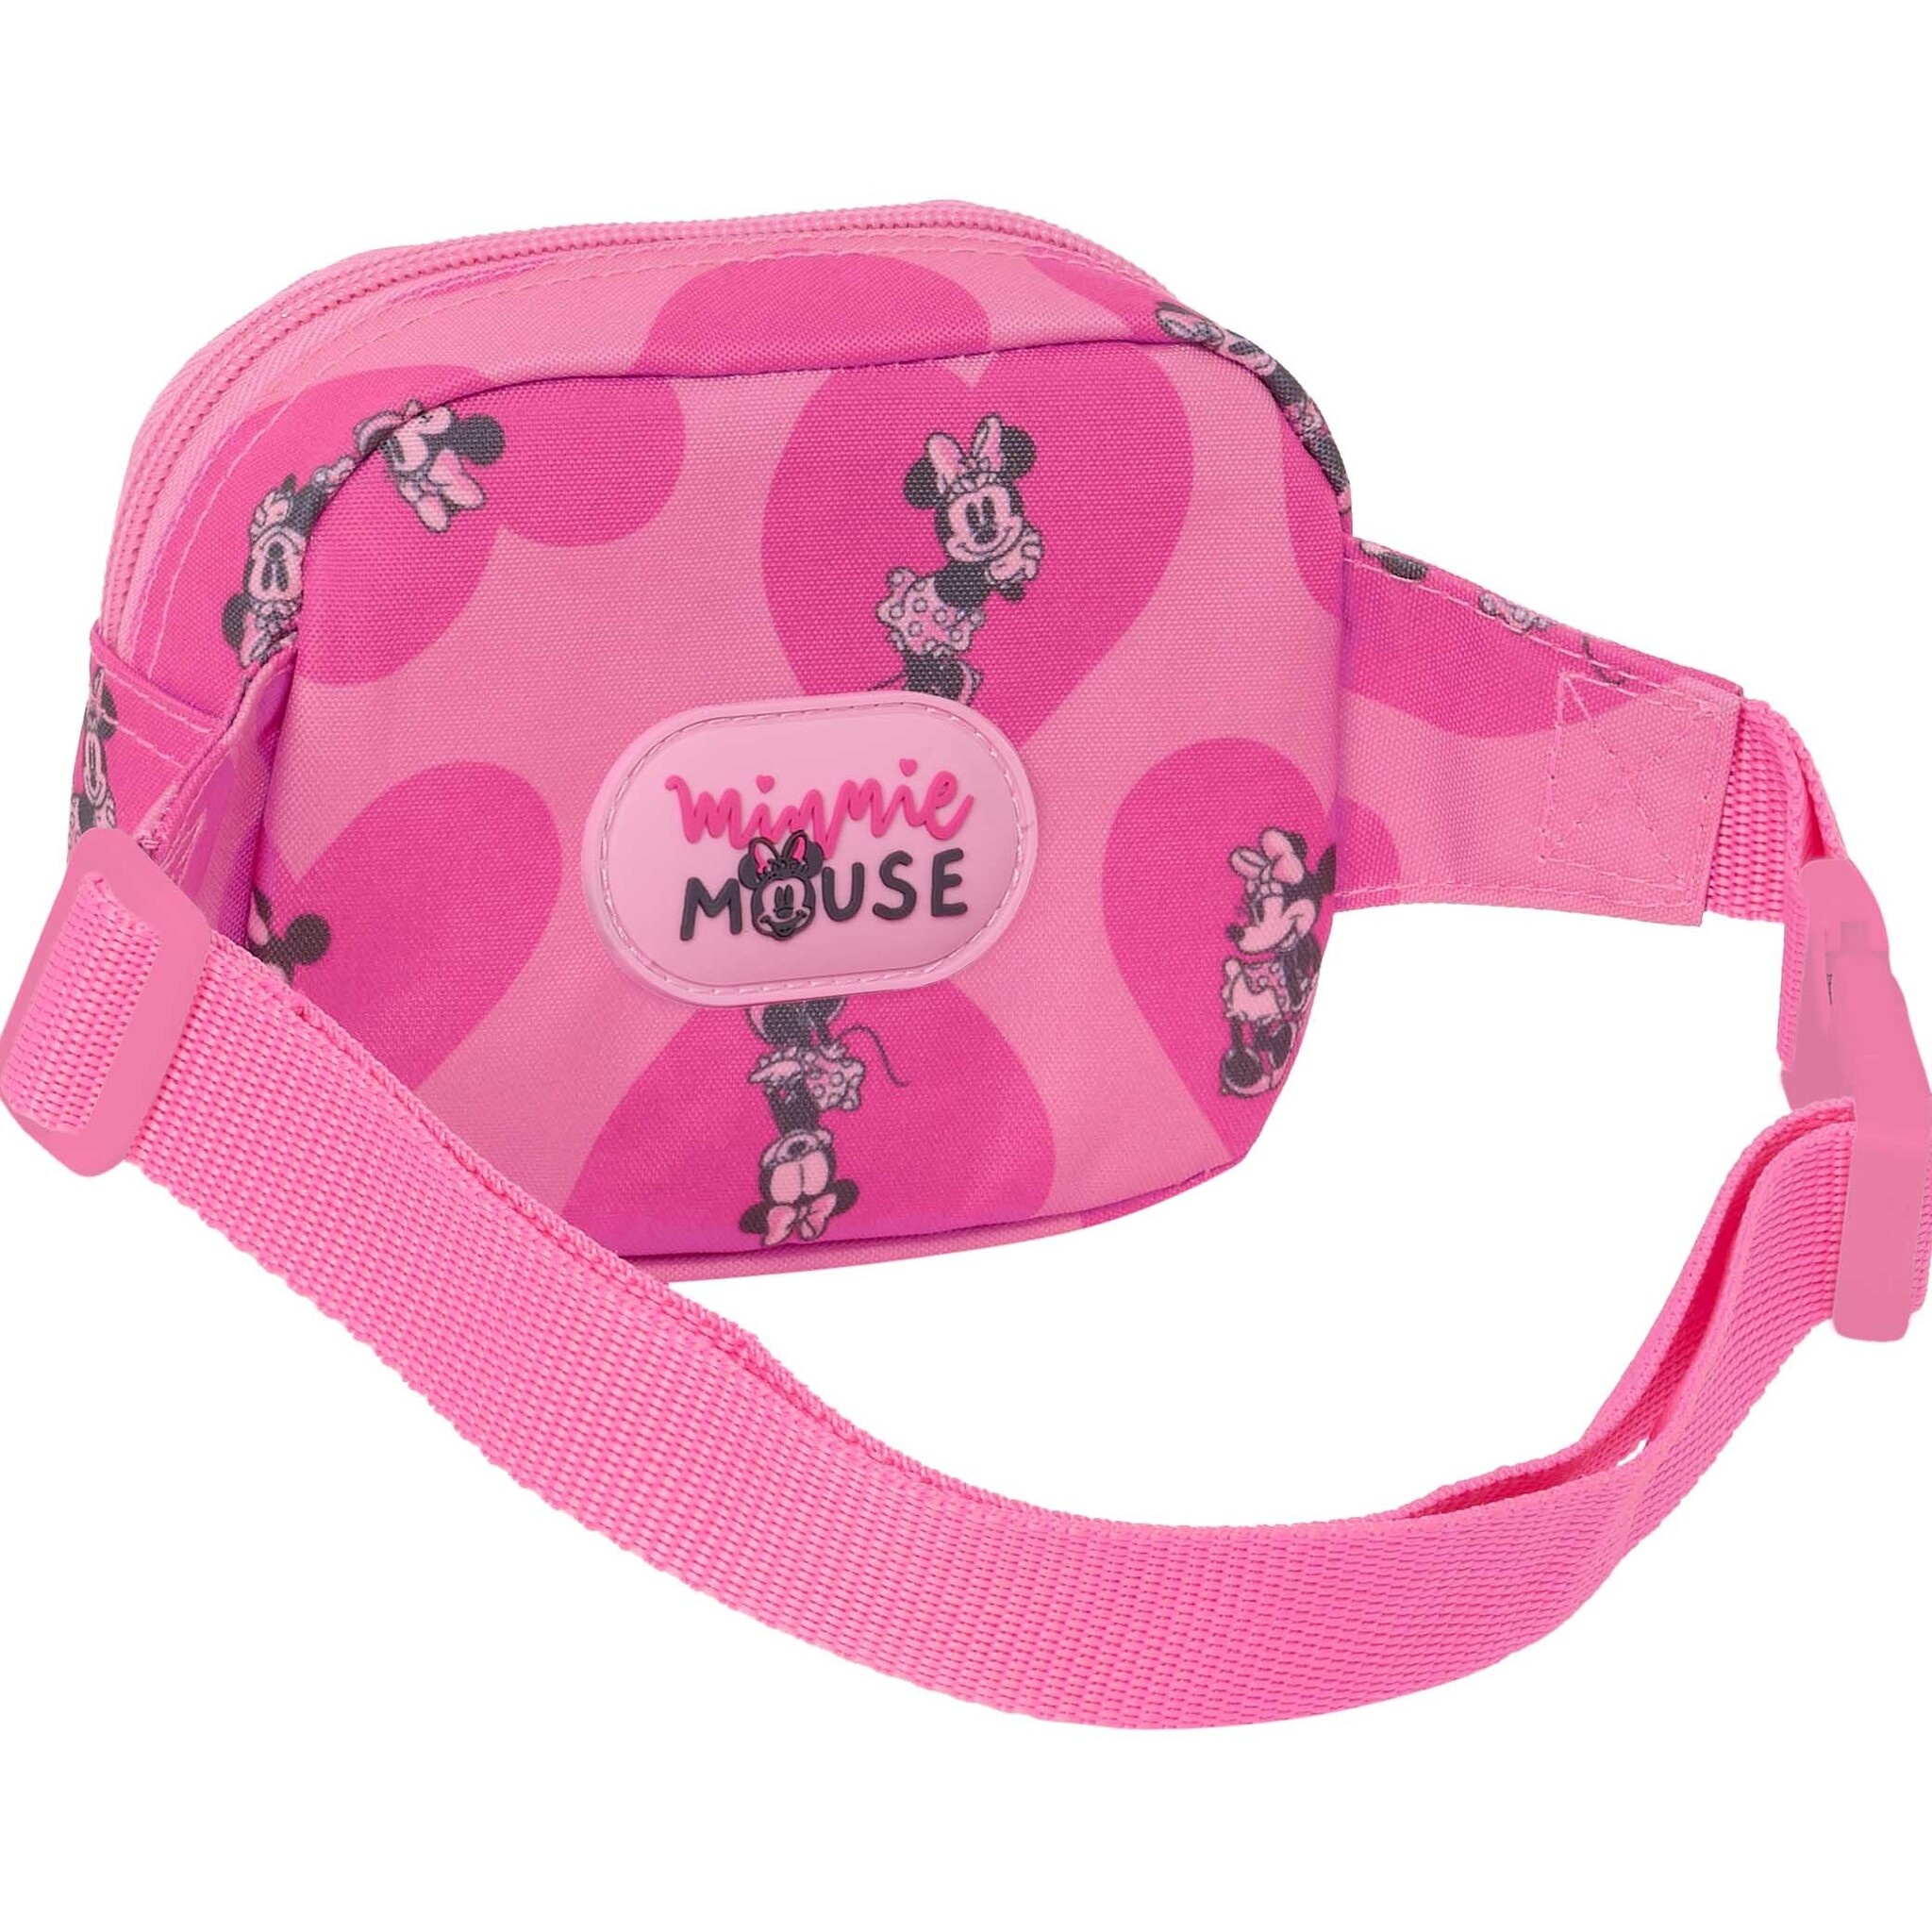 Disney Minnie Mouse Fanny pack, Loving - 14 x 11 x 4 cm - Polyester